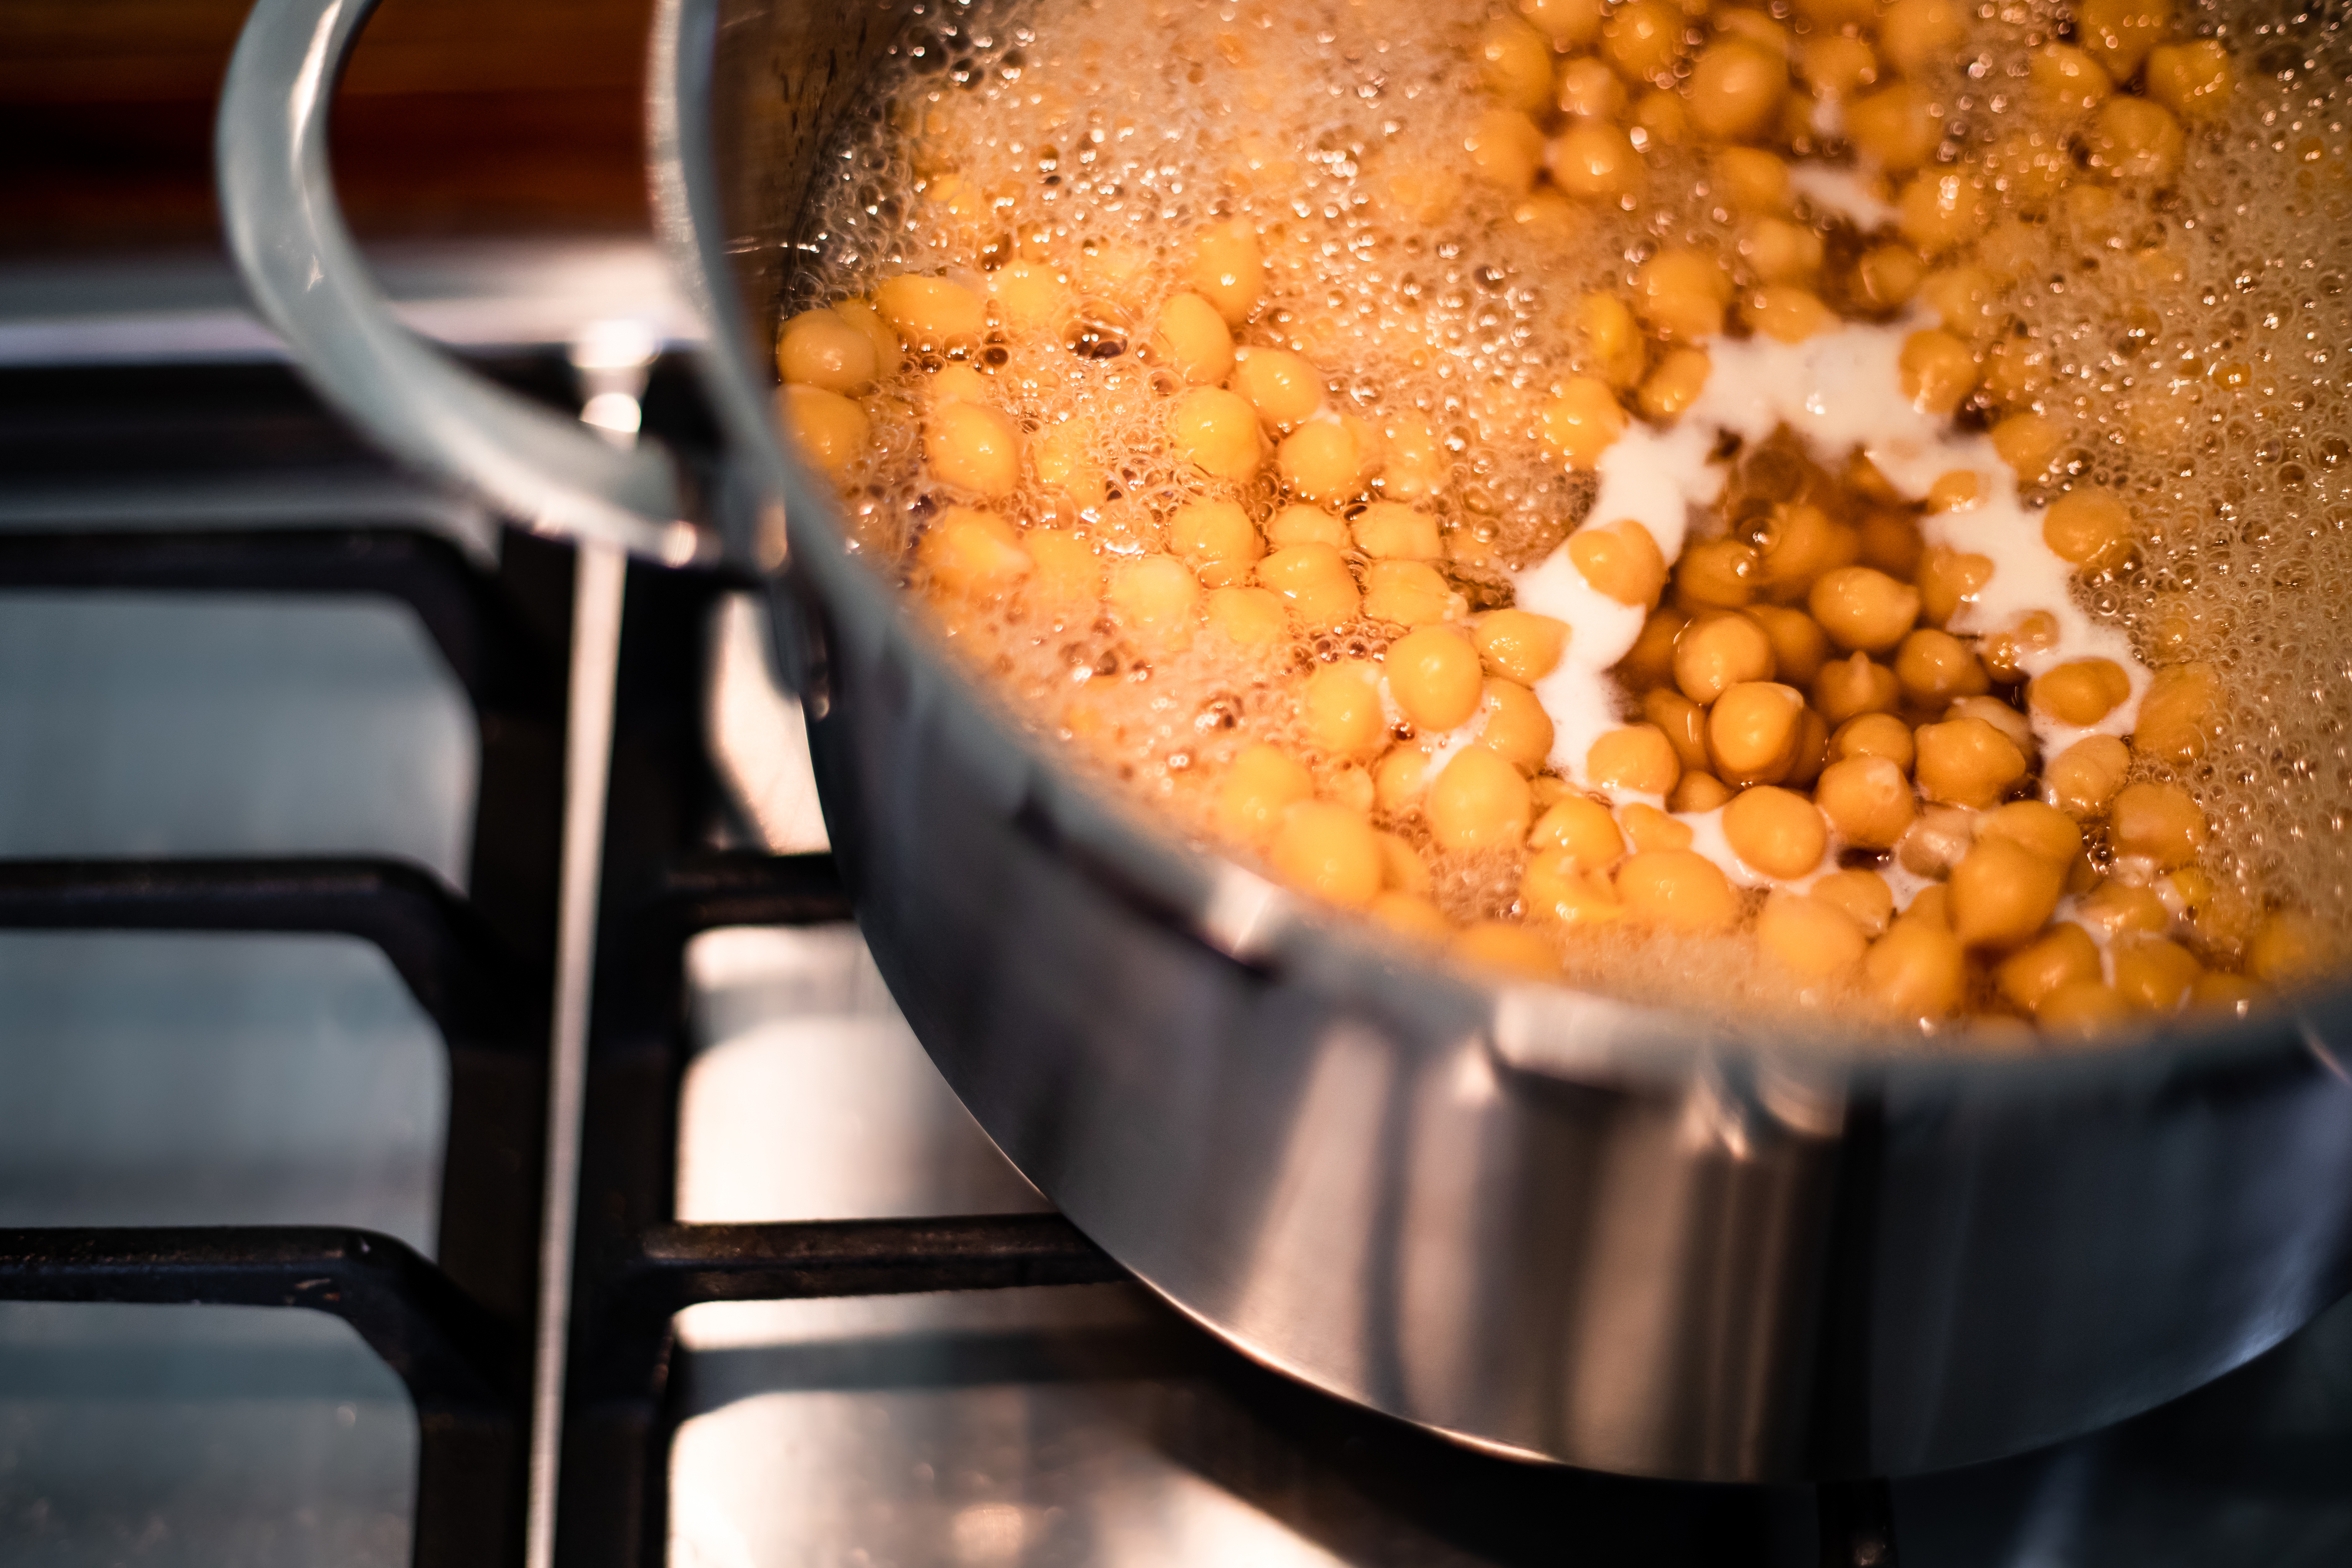 A pot of chickpeas simmering on the stove